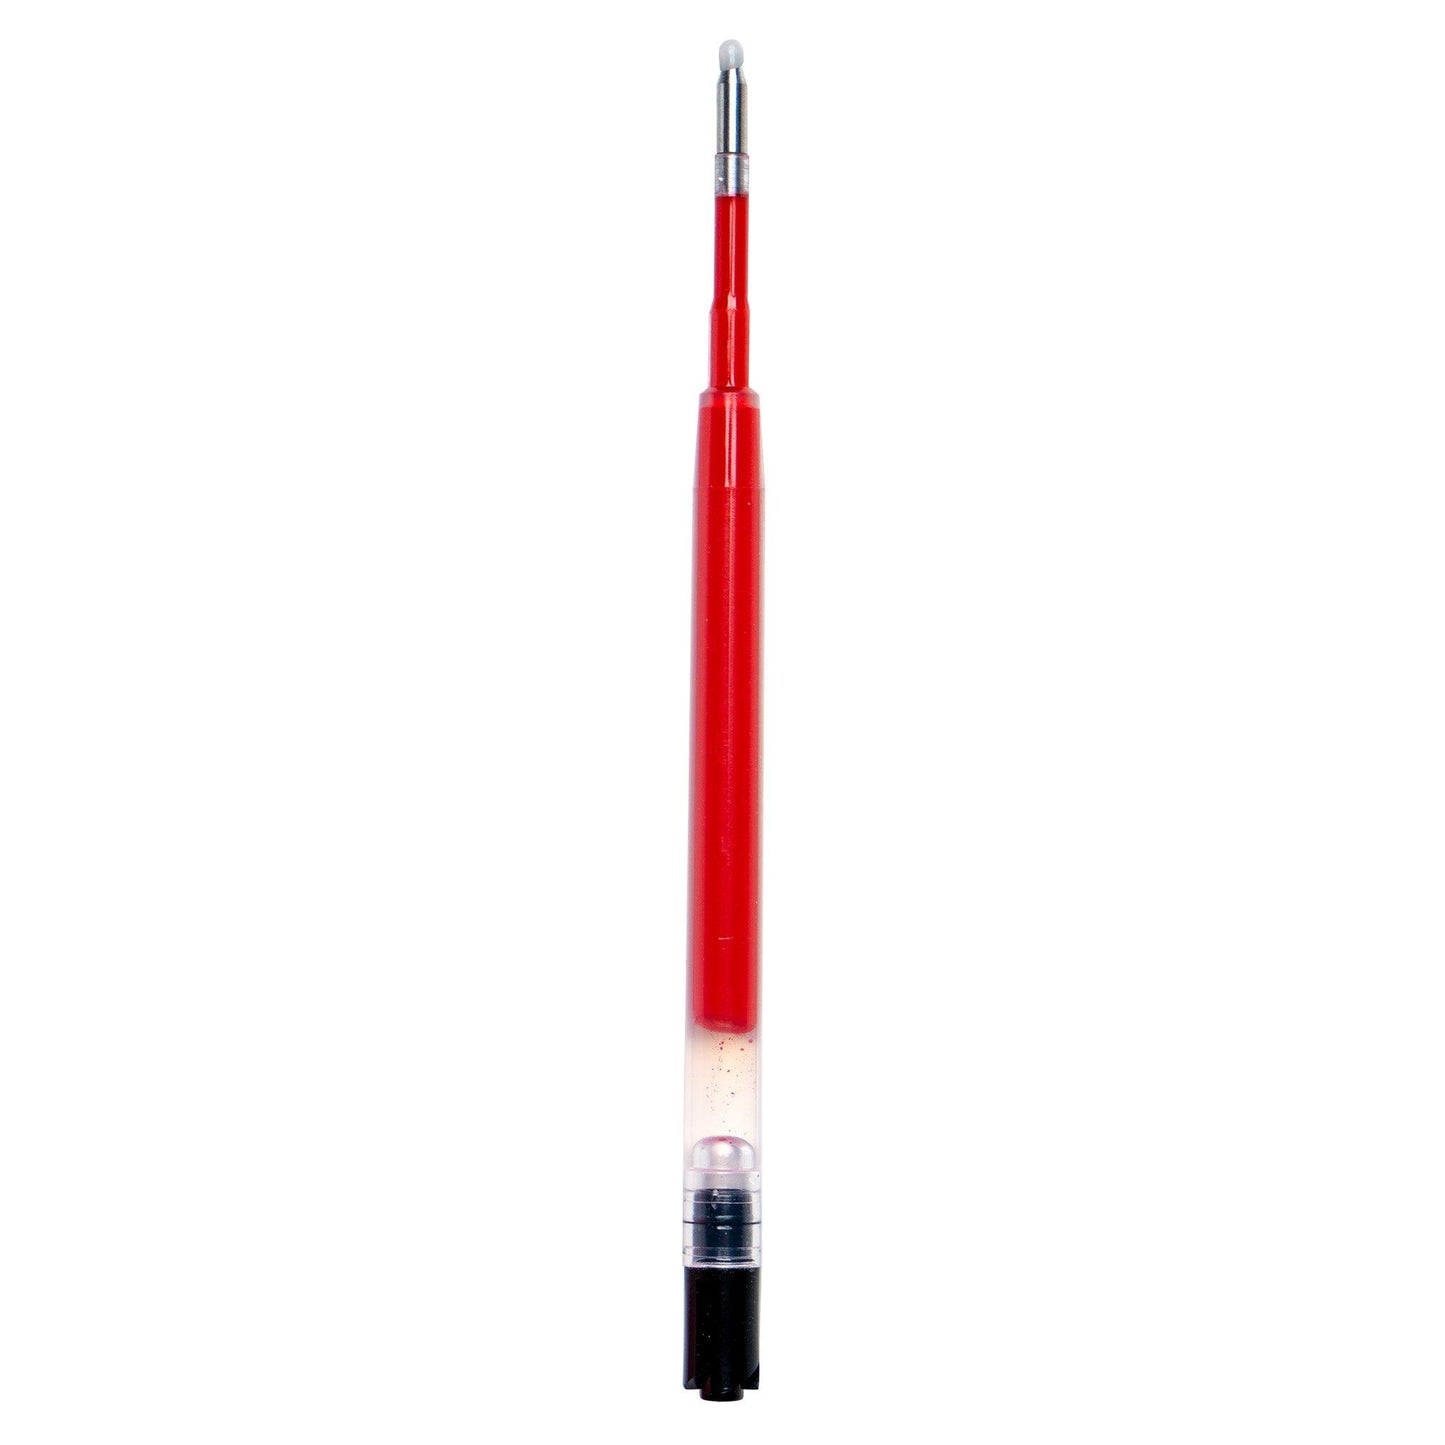 24ct - .5MM Red Ink Refills for The Crafters Gel Pen